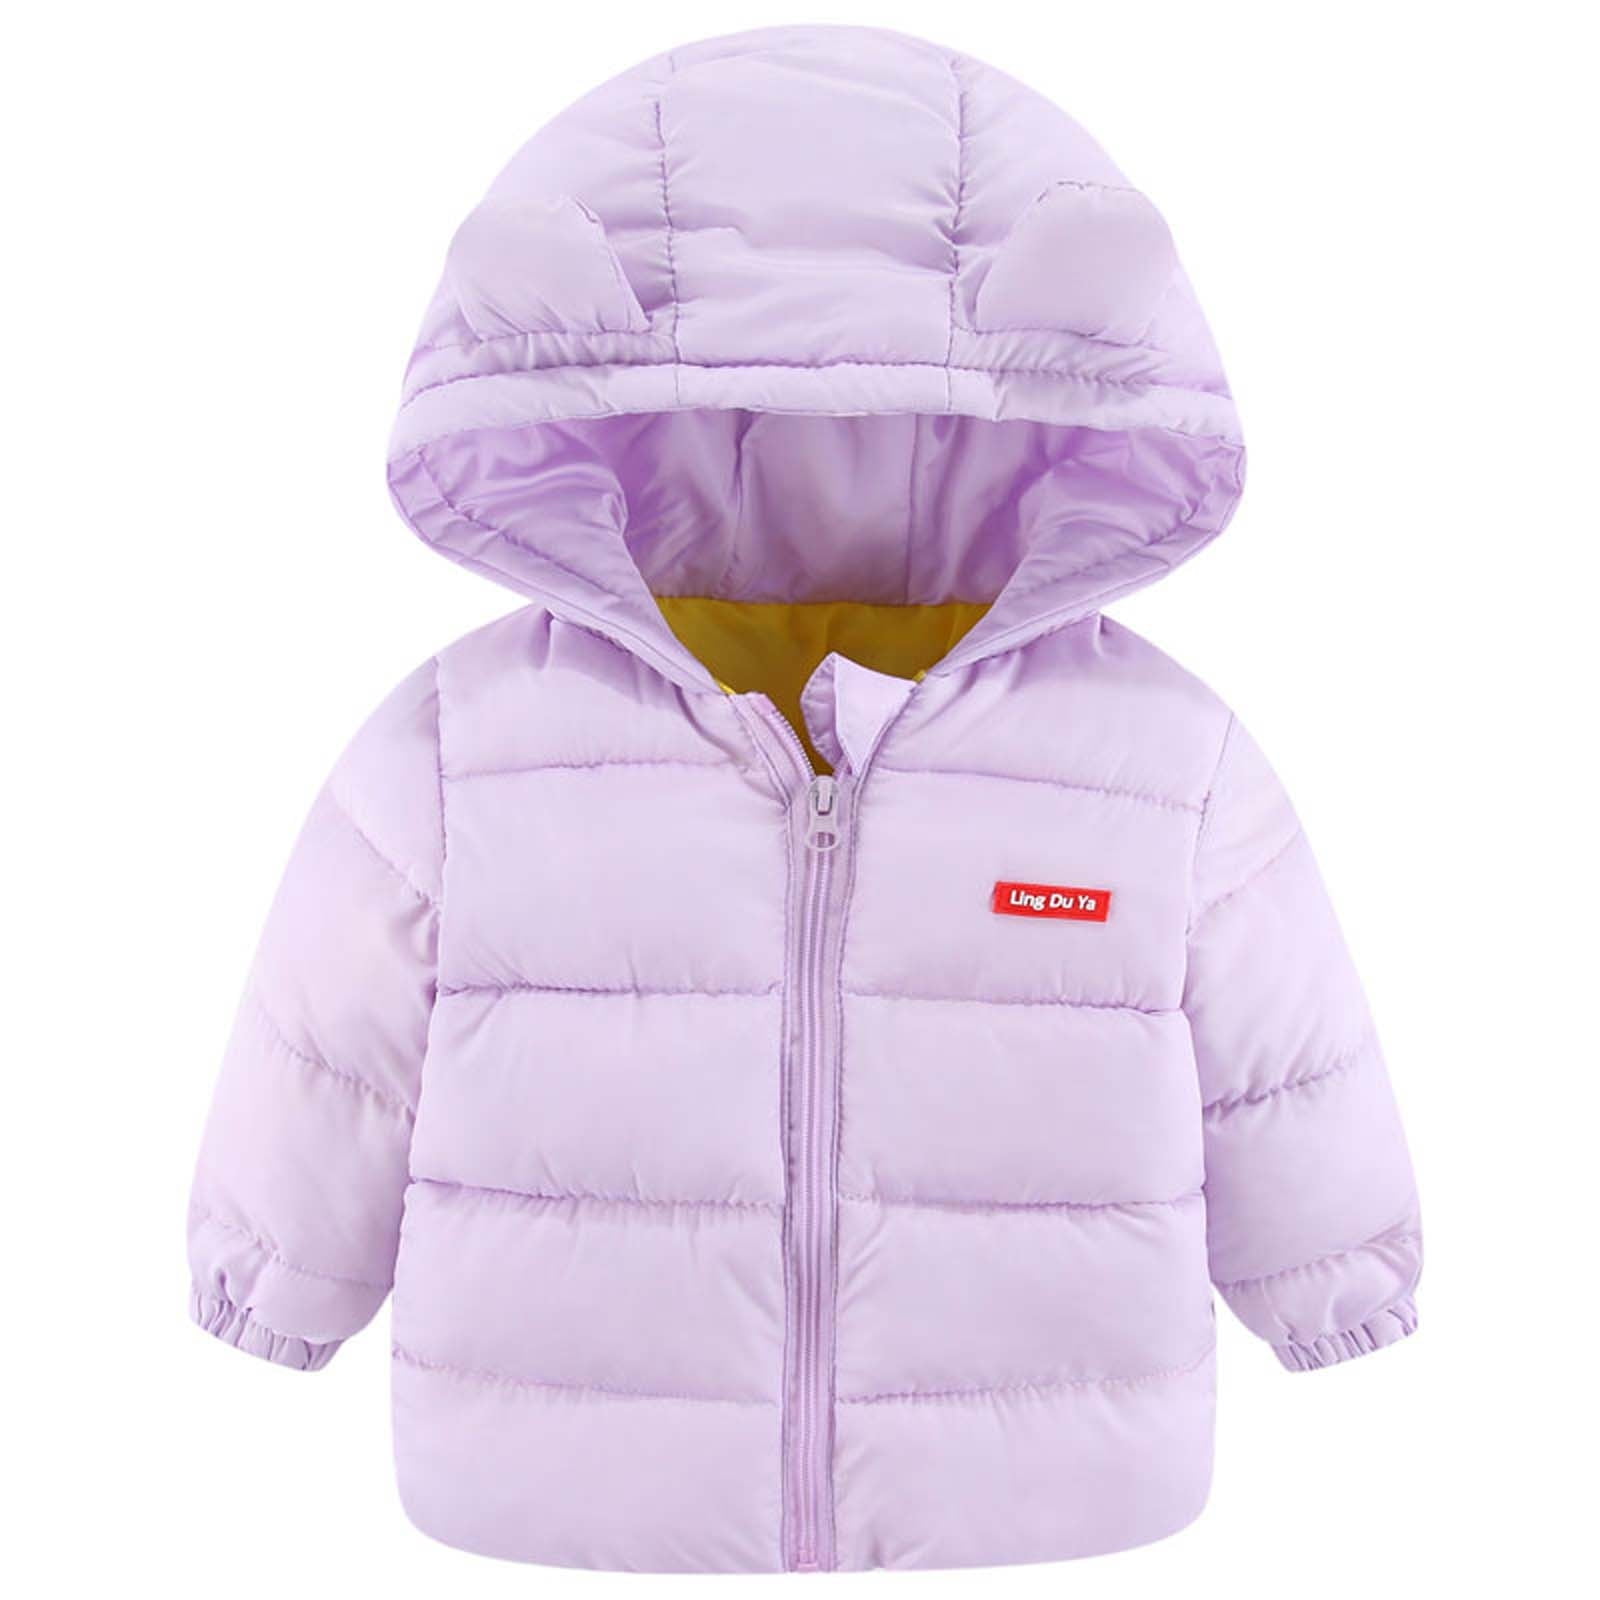 Details about   Kids Baby Boys Girls Winter Down Cotton Outerwear Hooded Thicken Snow Jacket